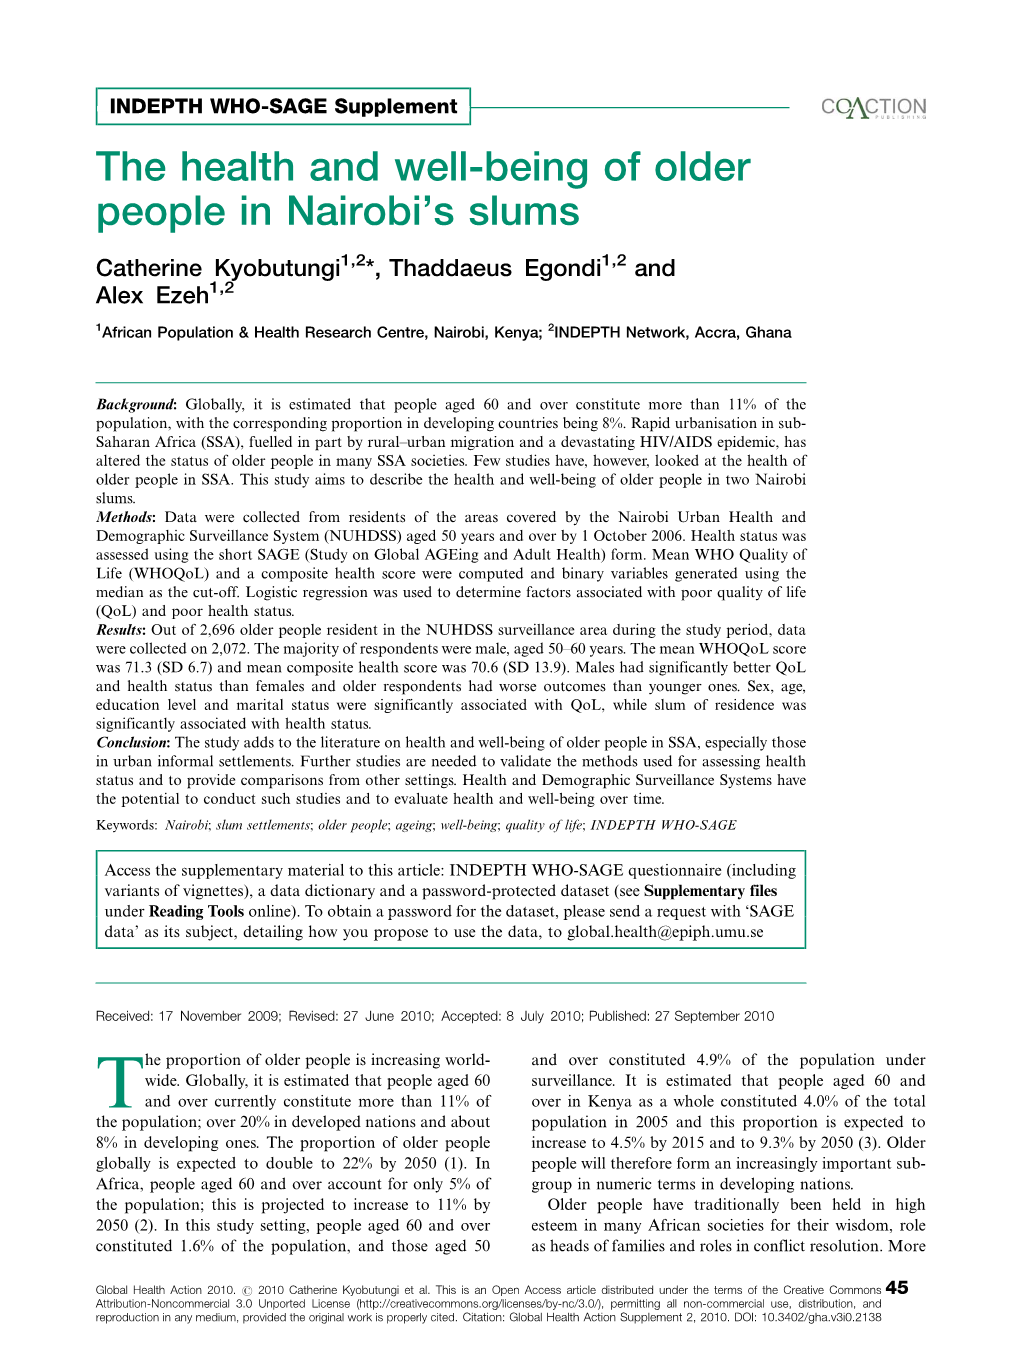 The Health and Well-Being of Older People in Nairobi's Slums